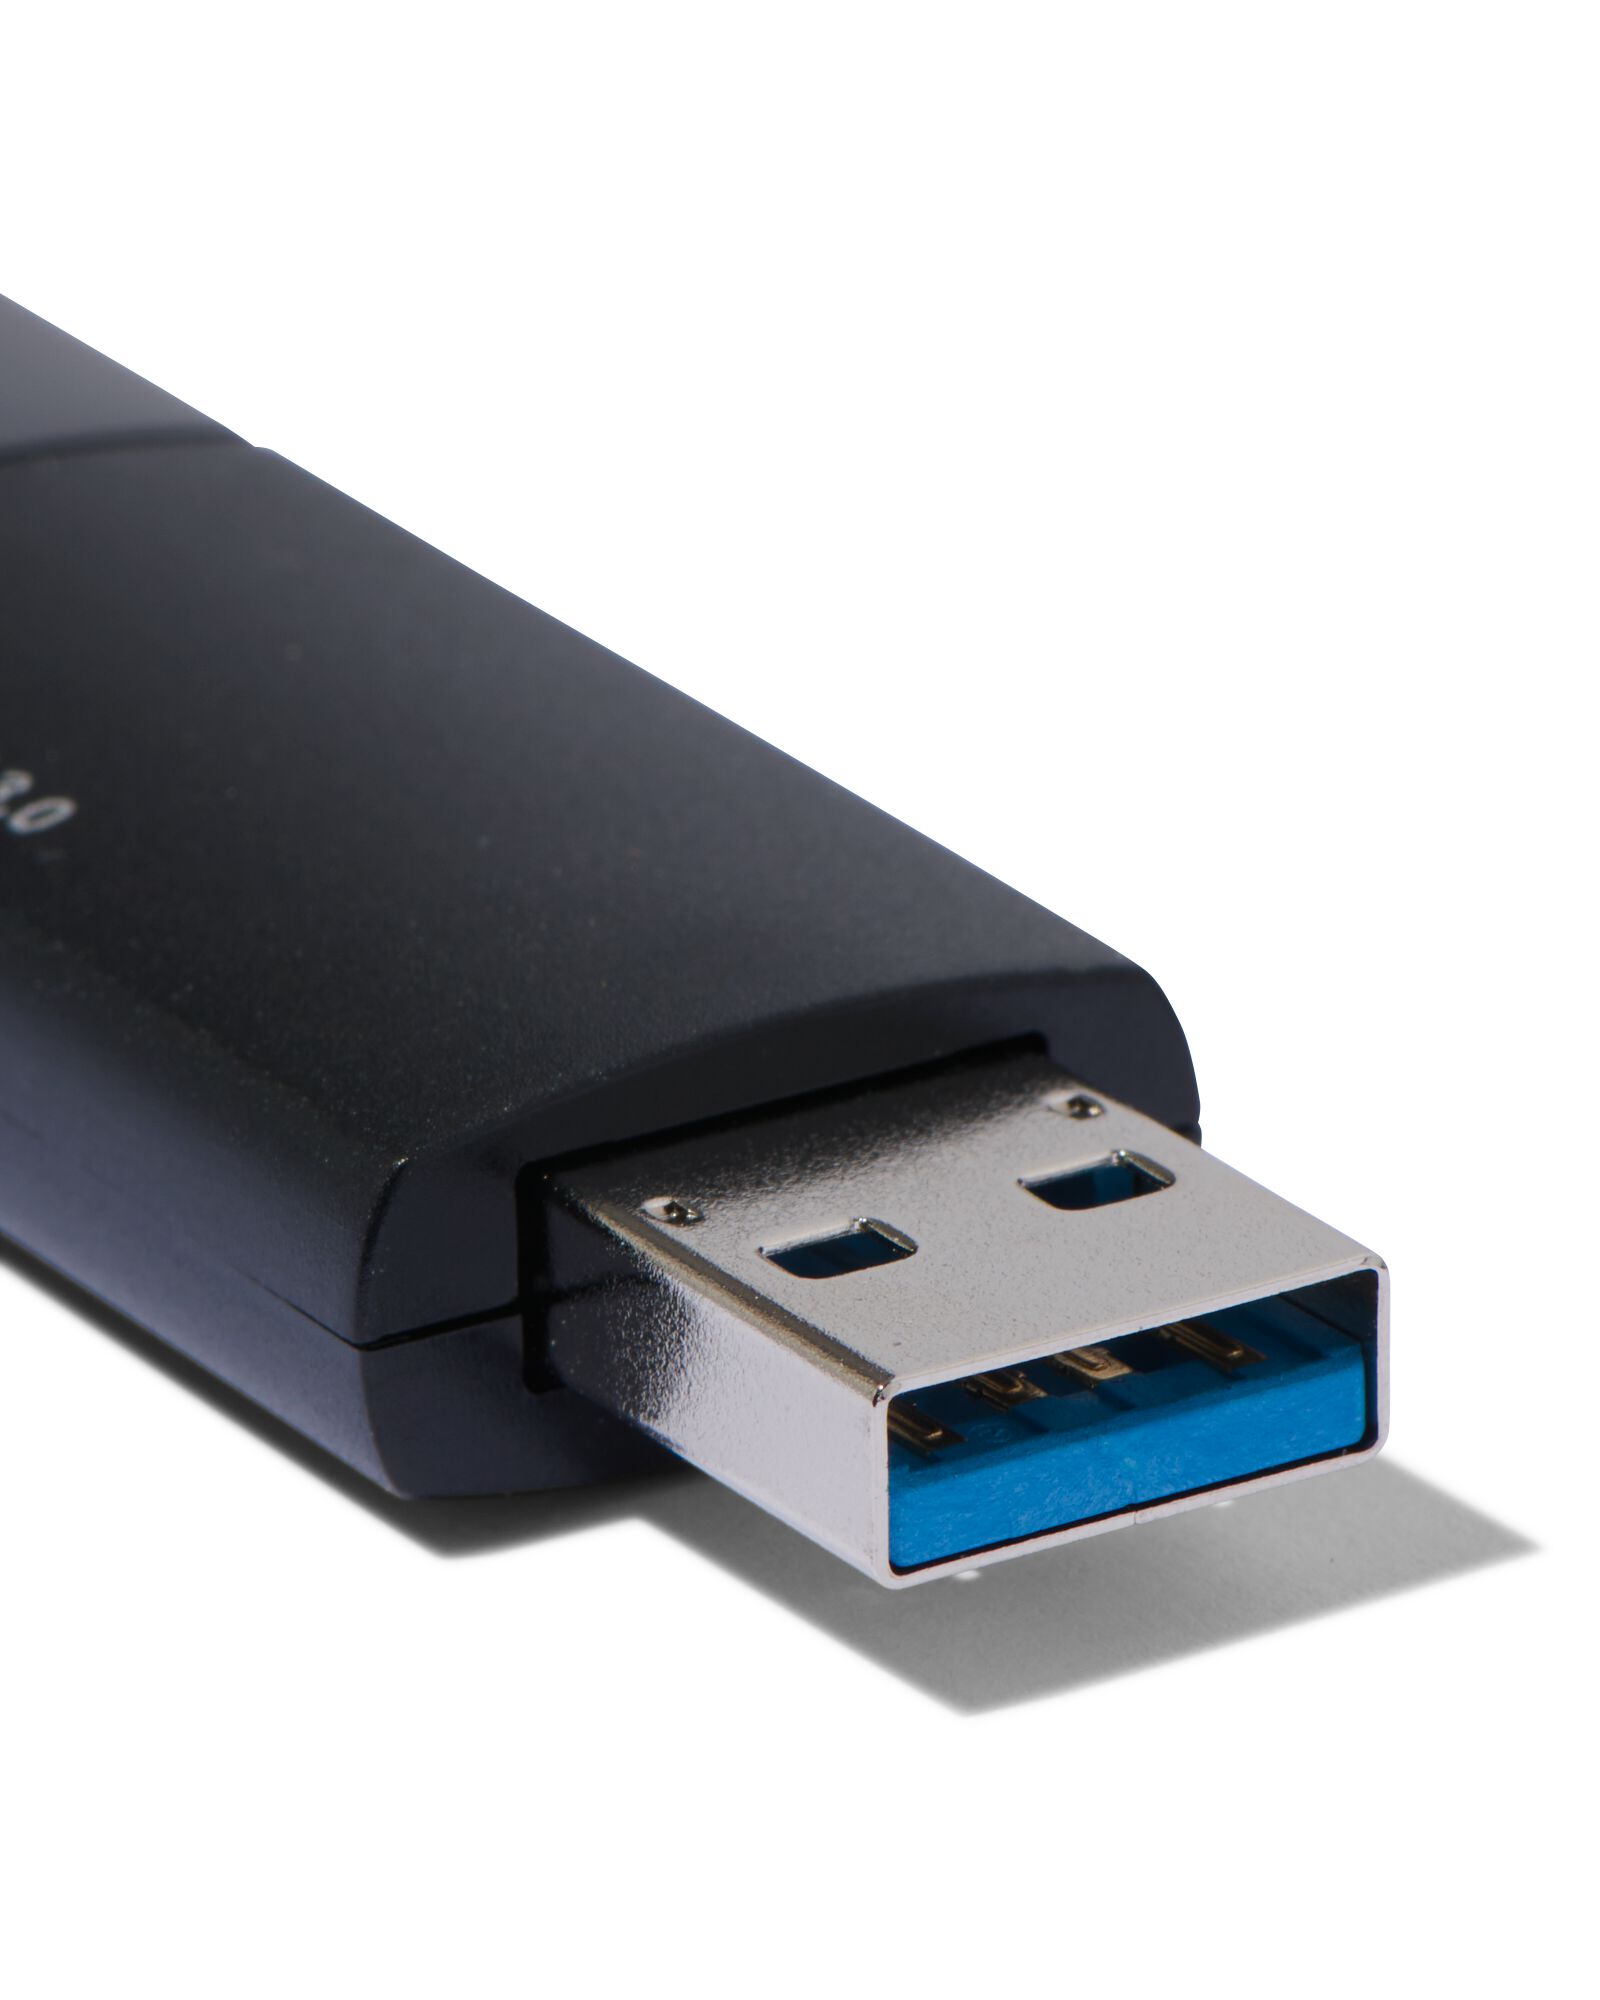 Cle Usb 32go Maxell pas cher - Achat neuf et occasion